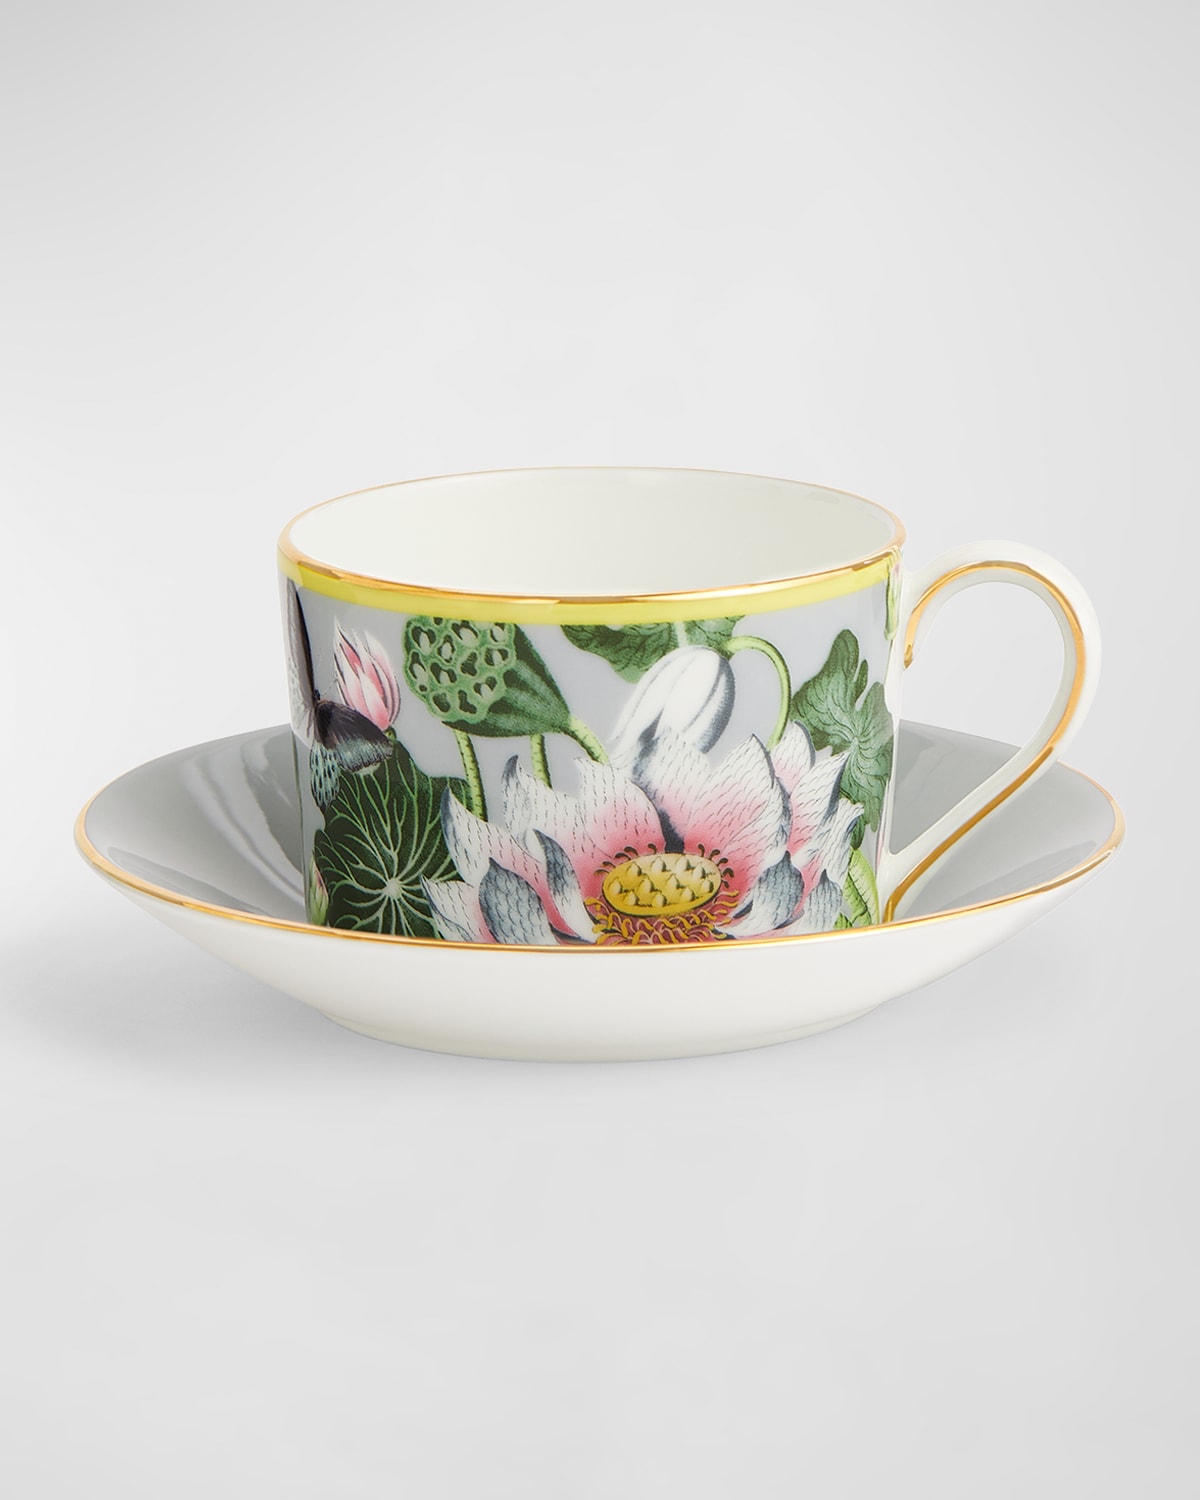 Waterlily Teacup and Saucer Set